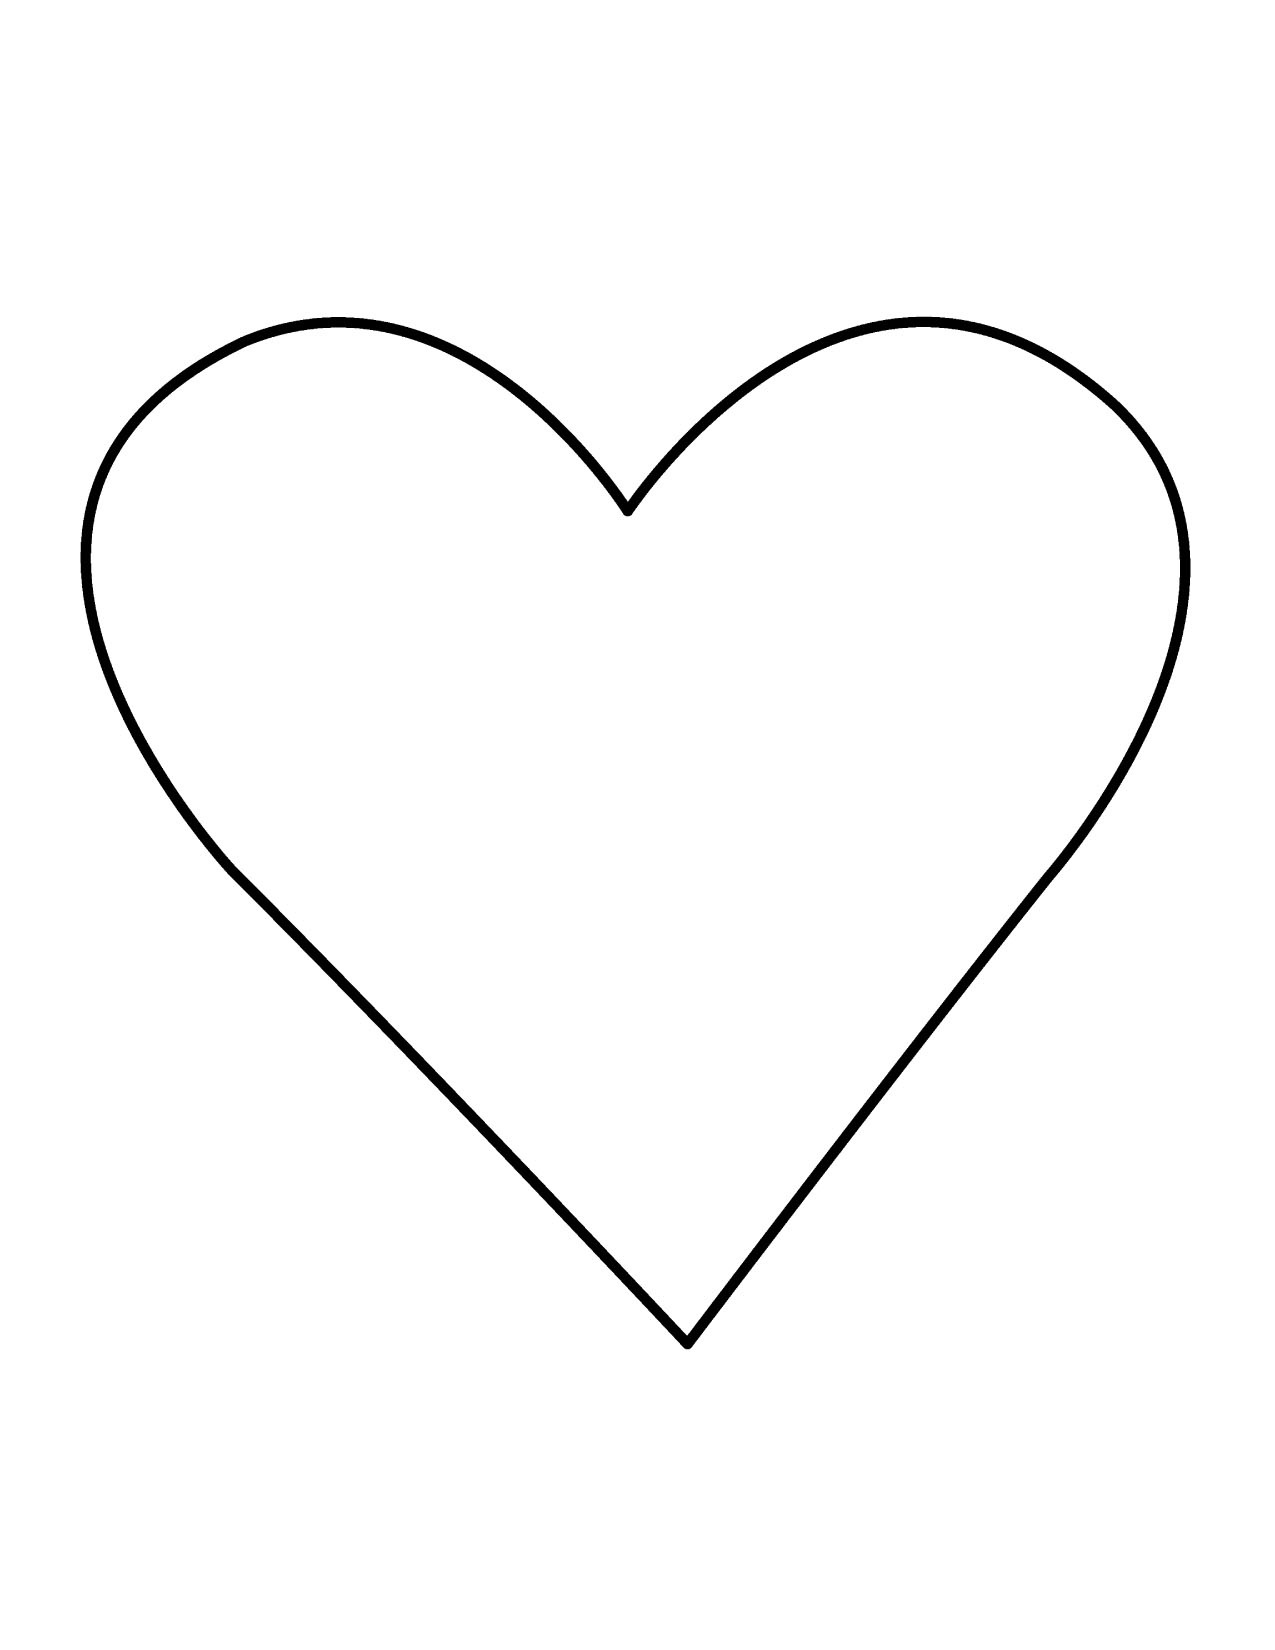 Picture Of A Heart Clipart - Cliparts.co